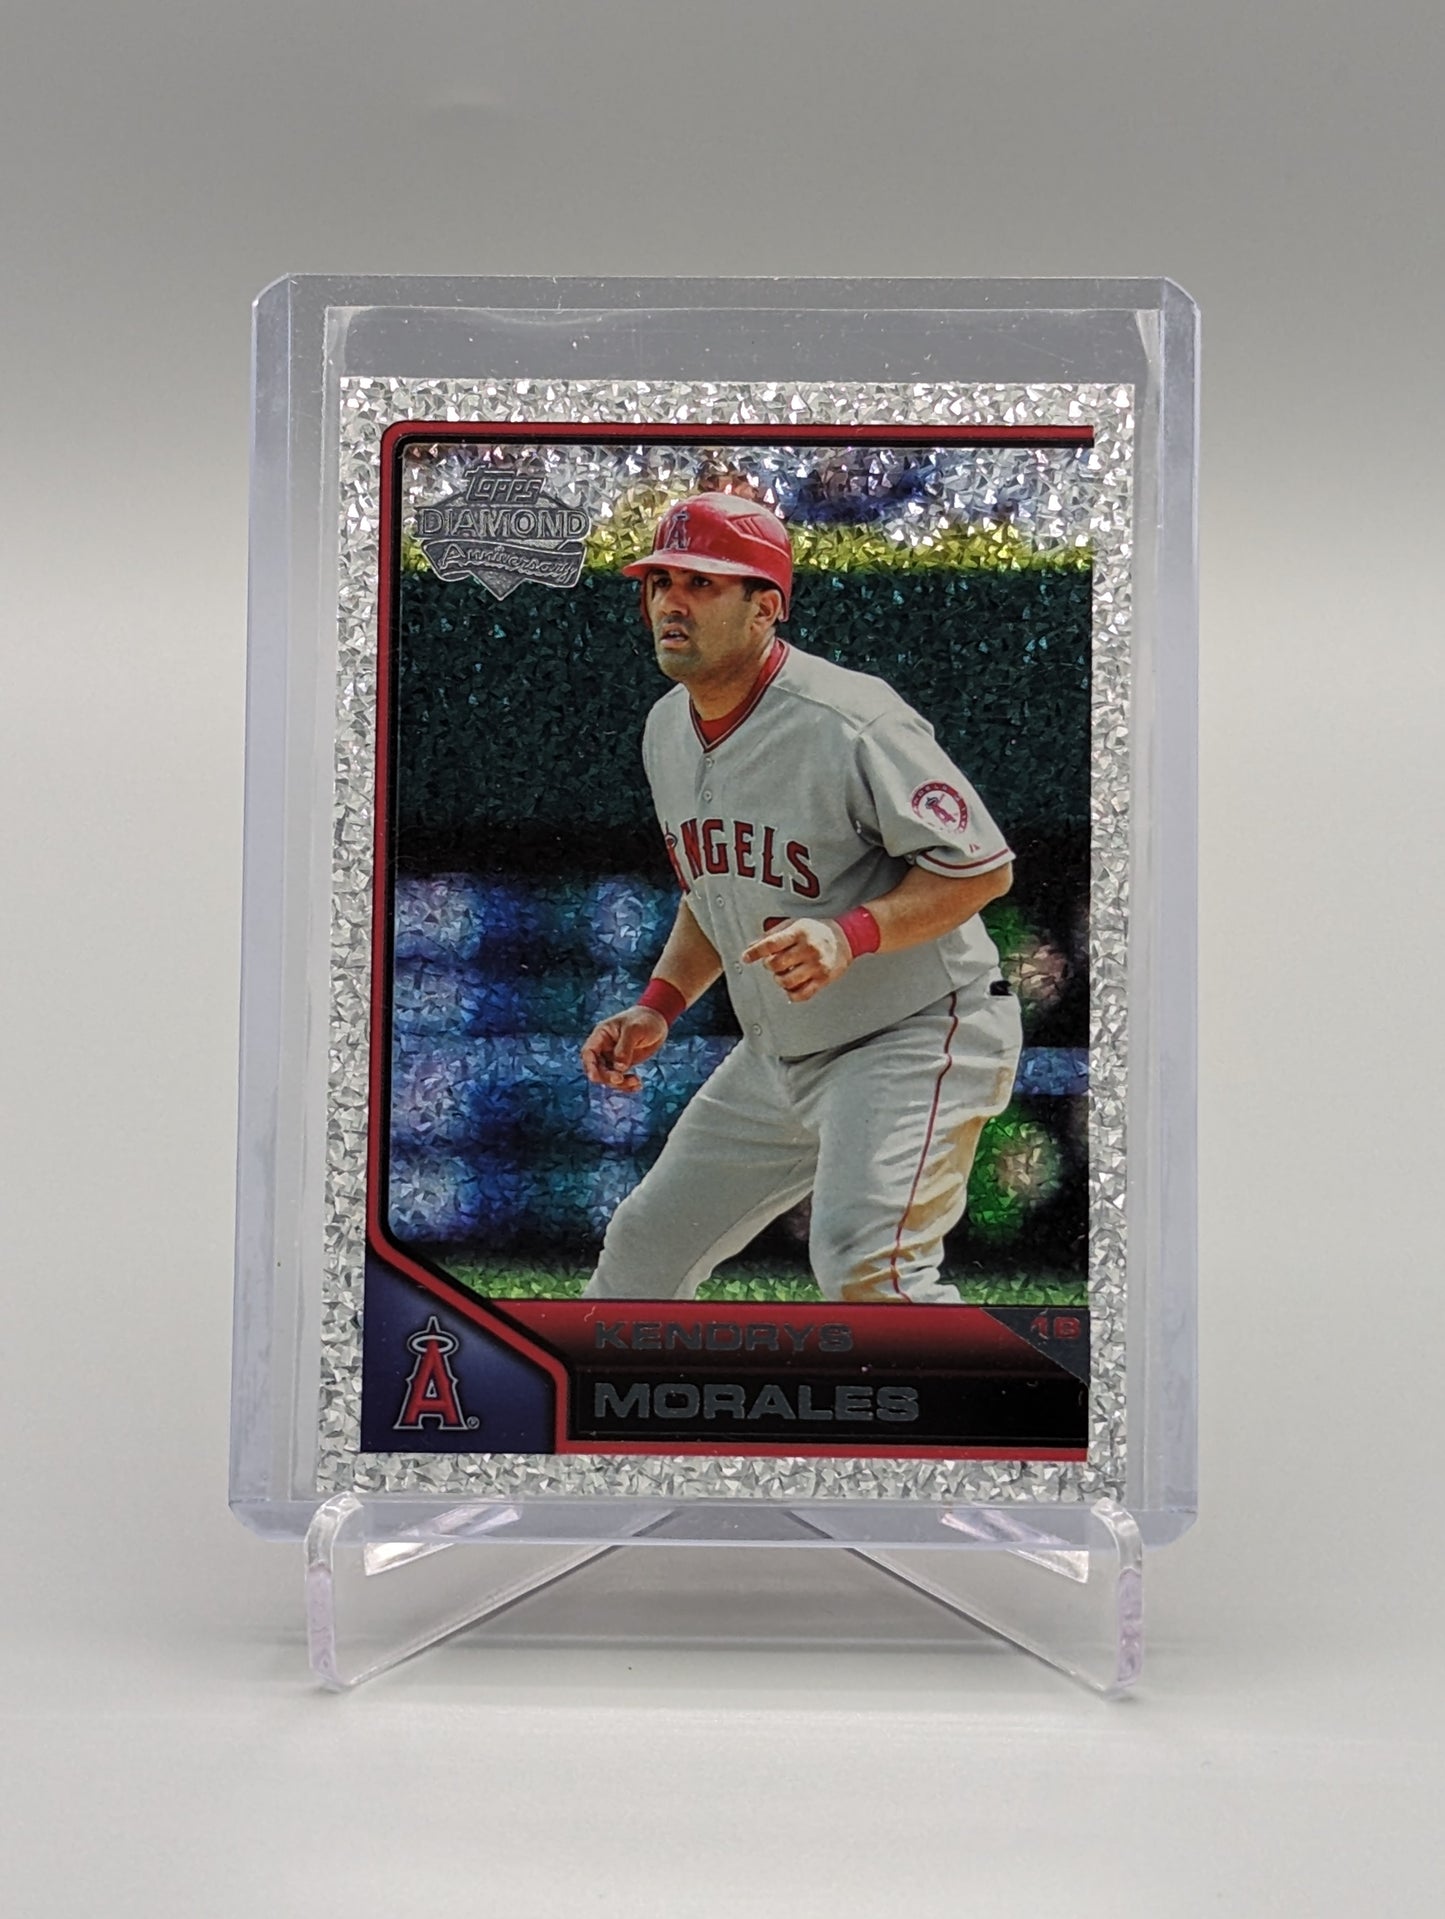 2011 Topps Lineage Diamond Anniversary Platinum Refractor #14 Kendrys Morales Angels